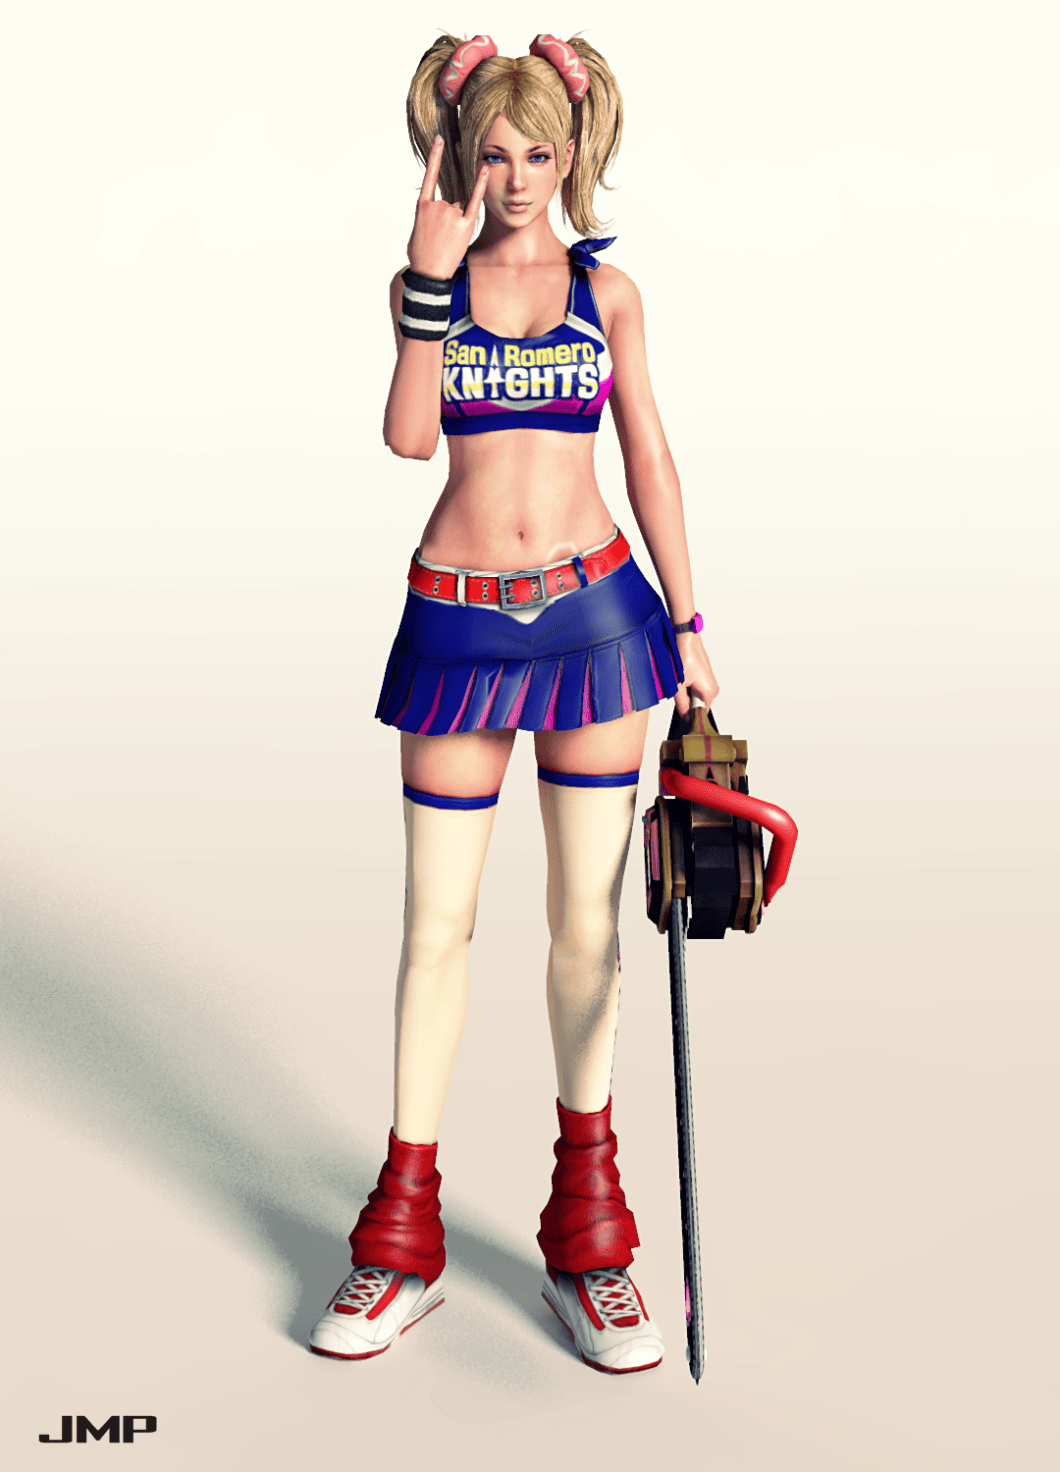 Lollipop Chainsaw wallpapers for desktop, download free Lollipop Chainsaw  pictures and backgrounds for PC